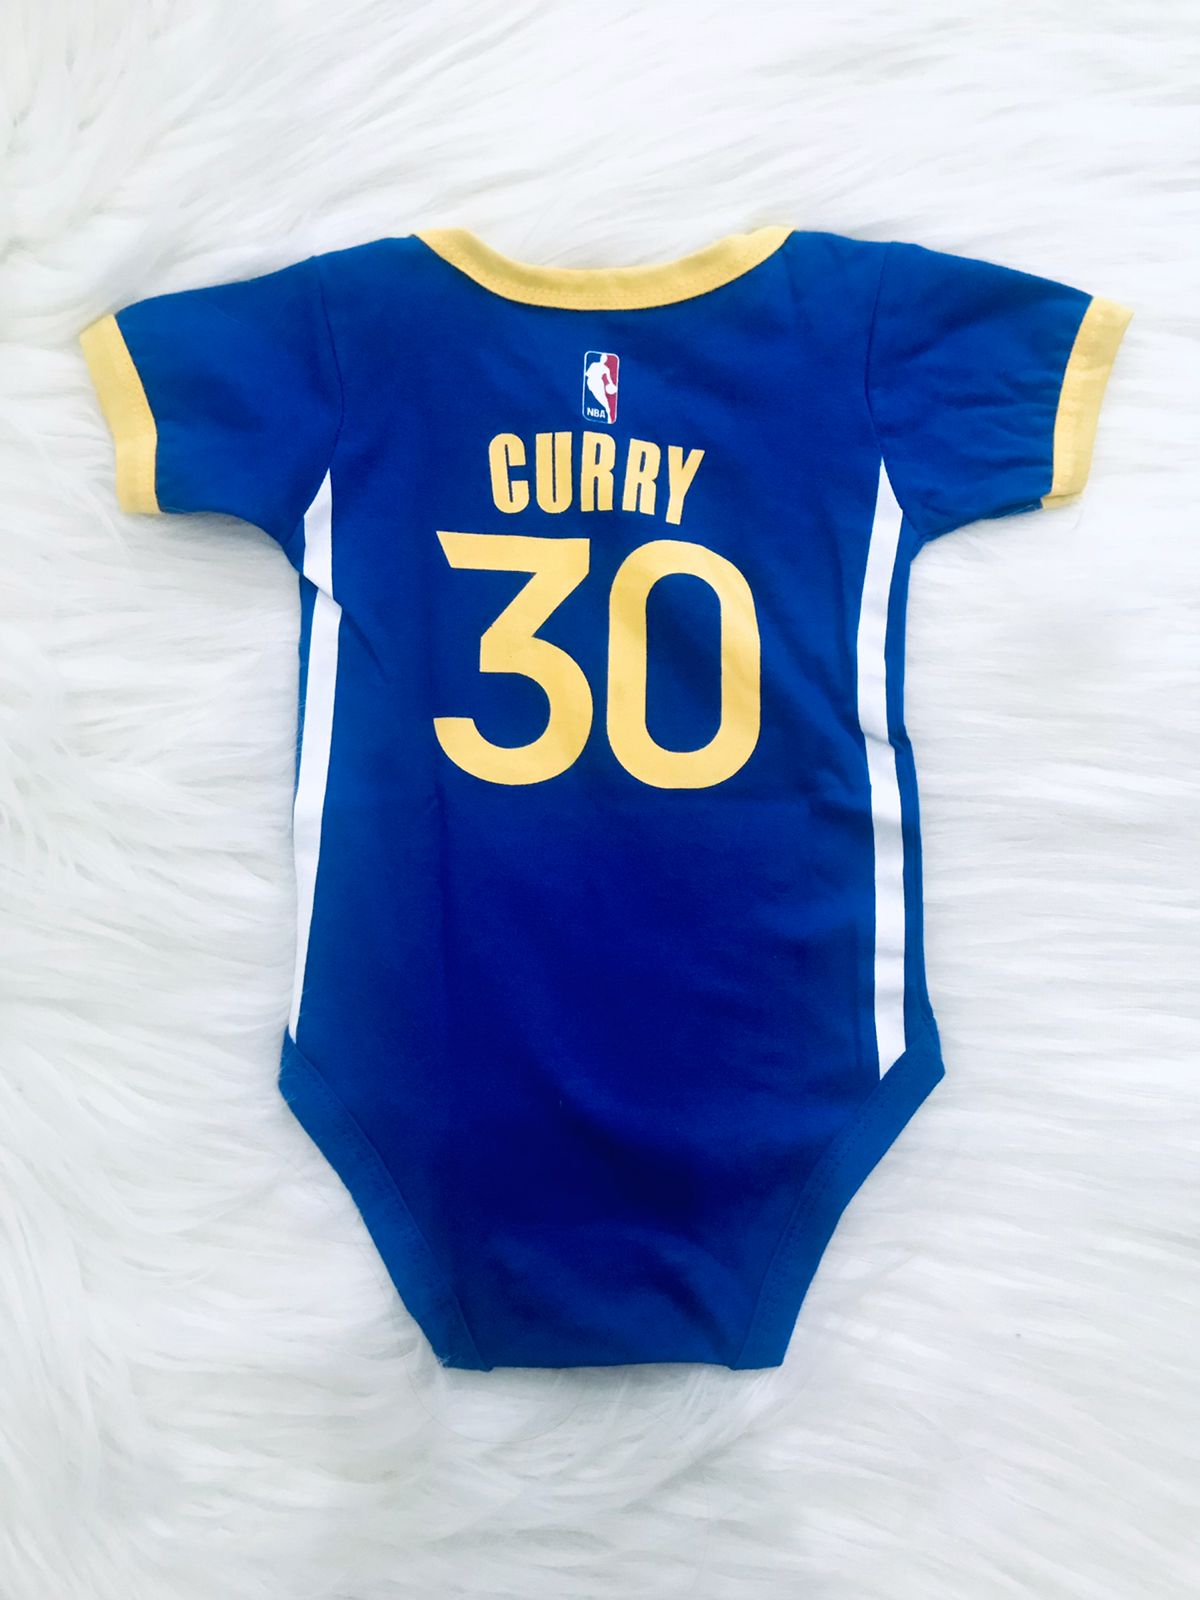 New Limited Edition NBA All Stars Golden State Warriors romper jersey 100% cotton | Curry 30 Edition